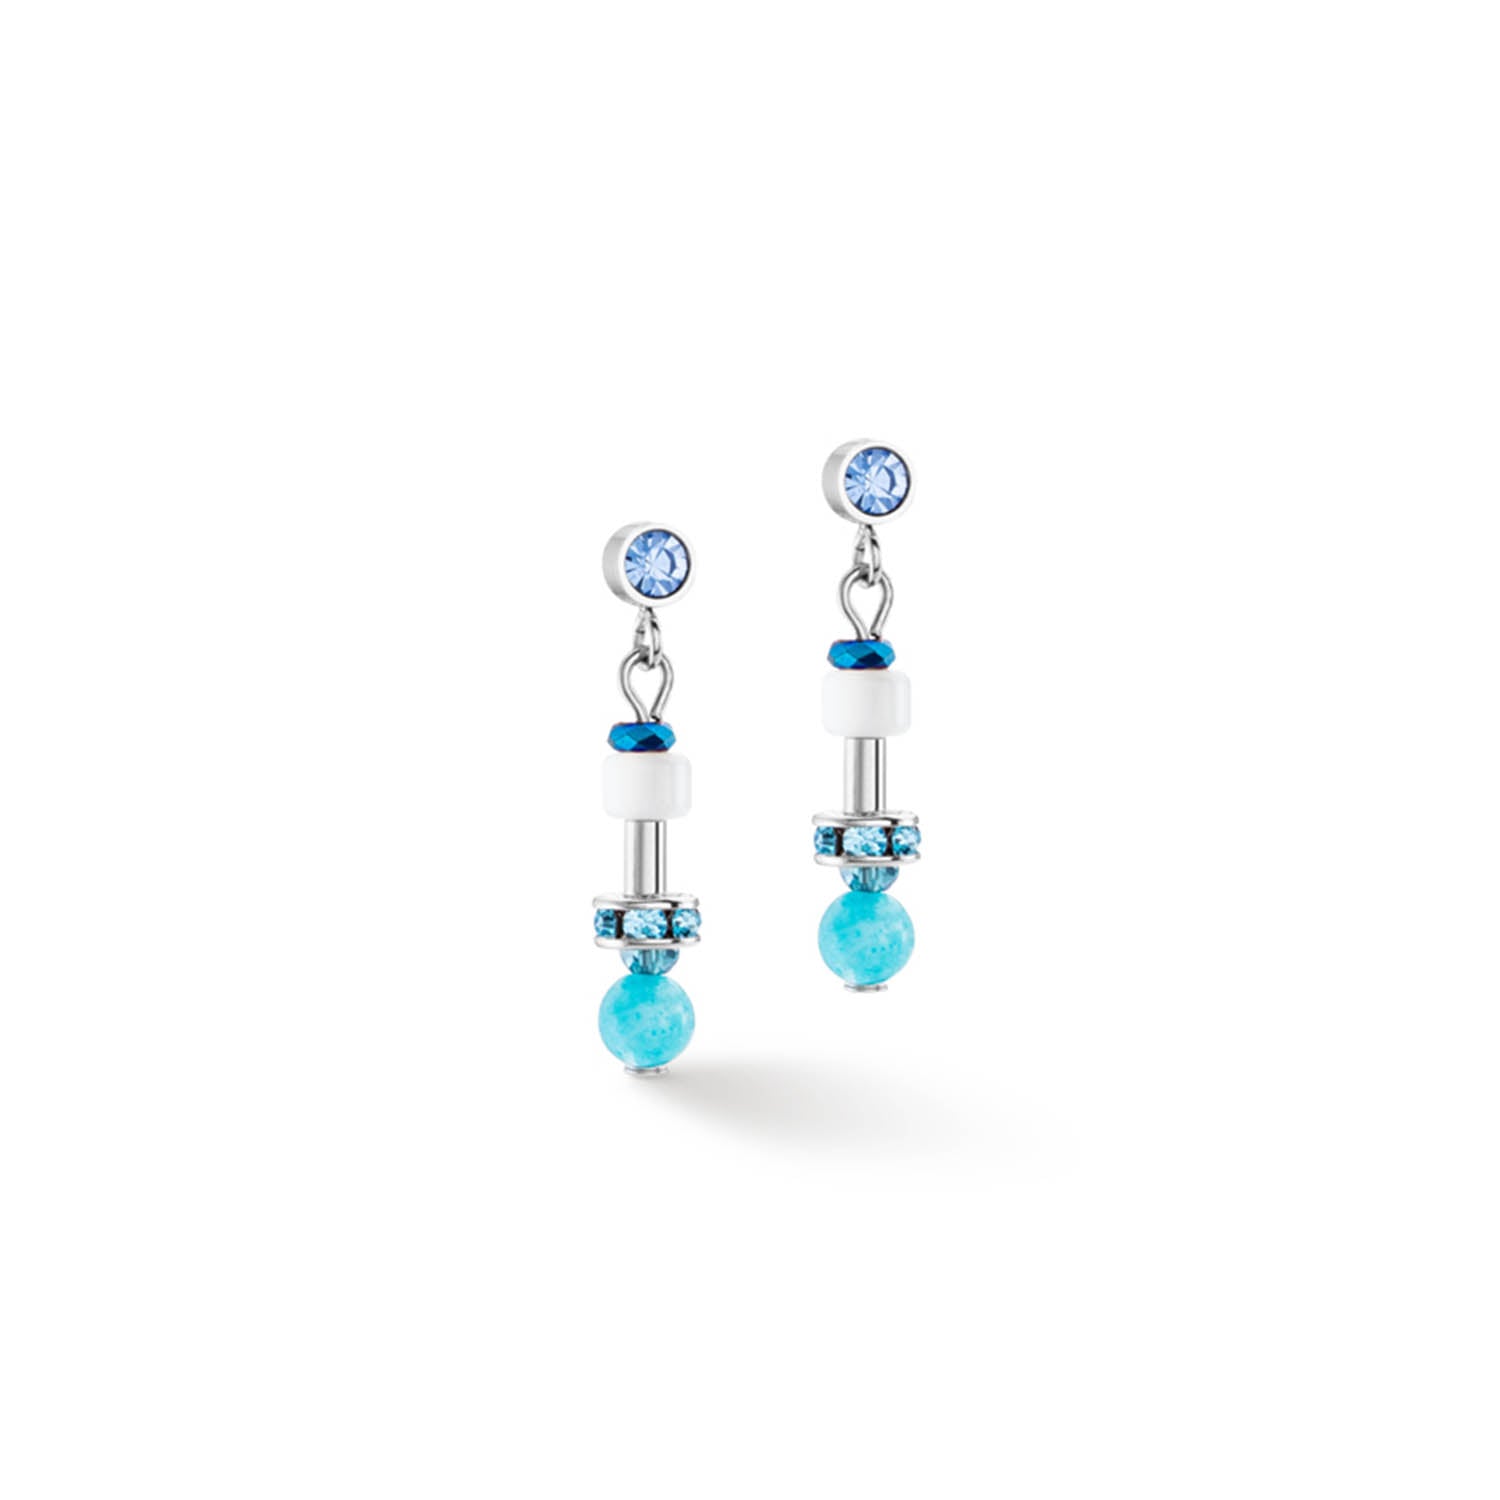 Princess Sphere Mix Turquoise Earrings 4352/21_0600